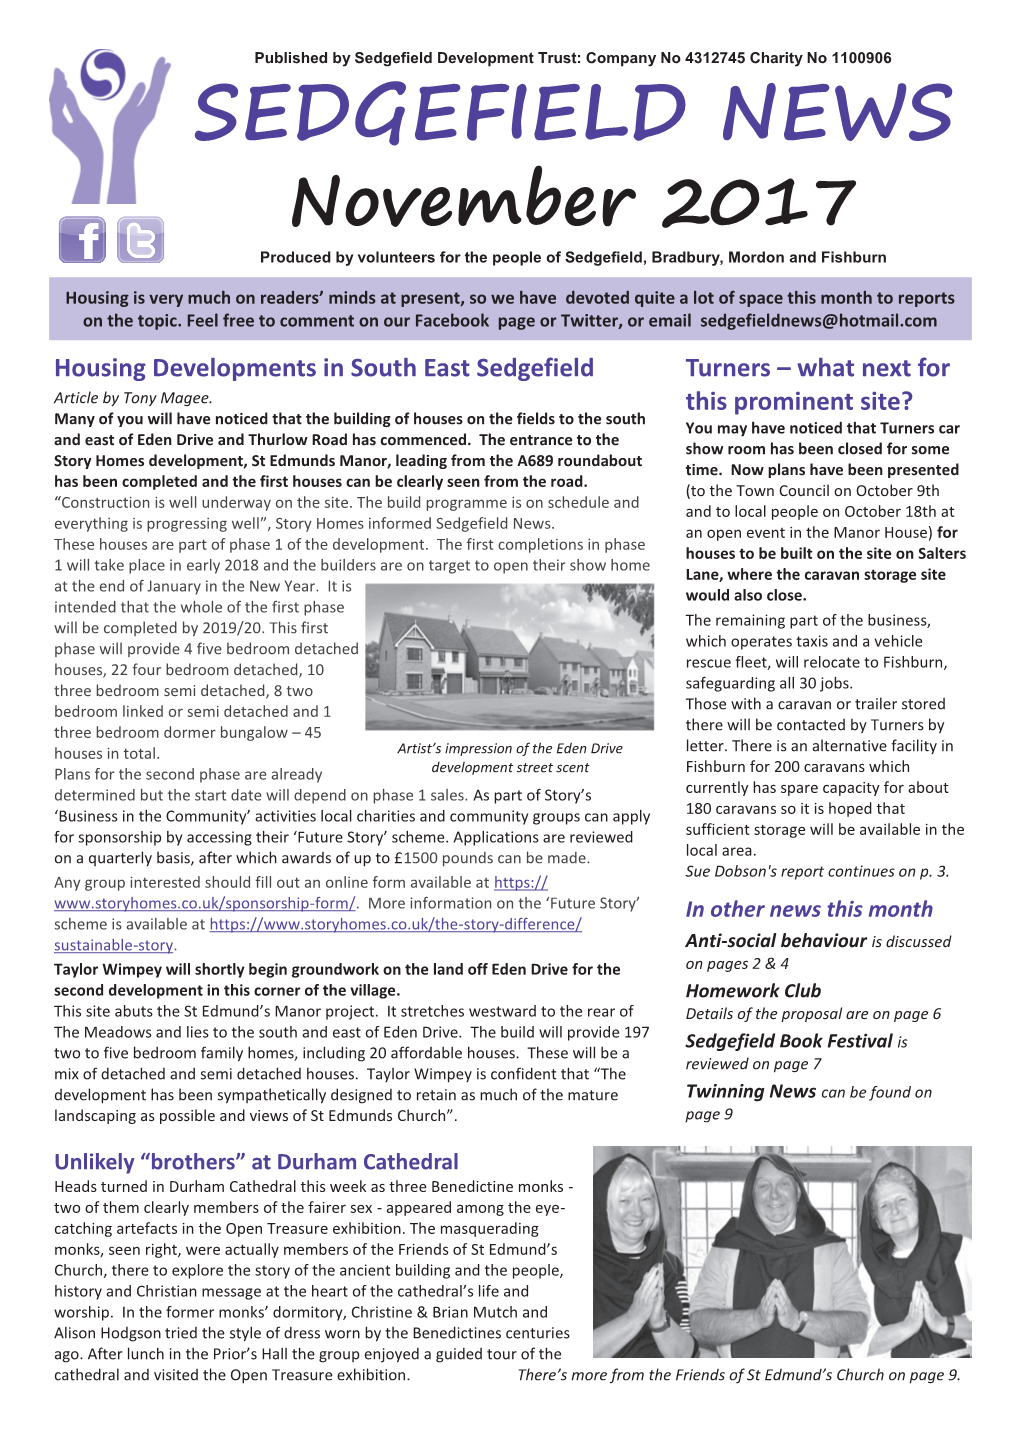 November 2017 Produced by Volunteers for the People of Sedgefield, Bradbury, Mordon and Fishburn